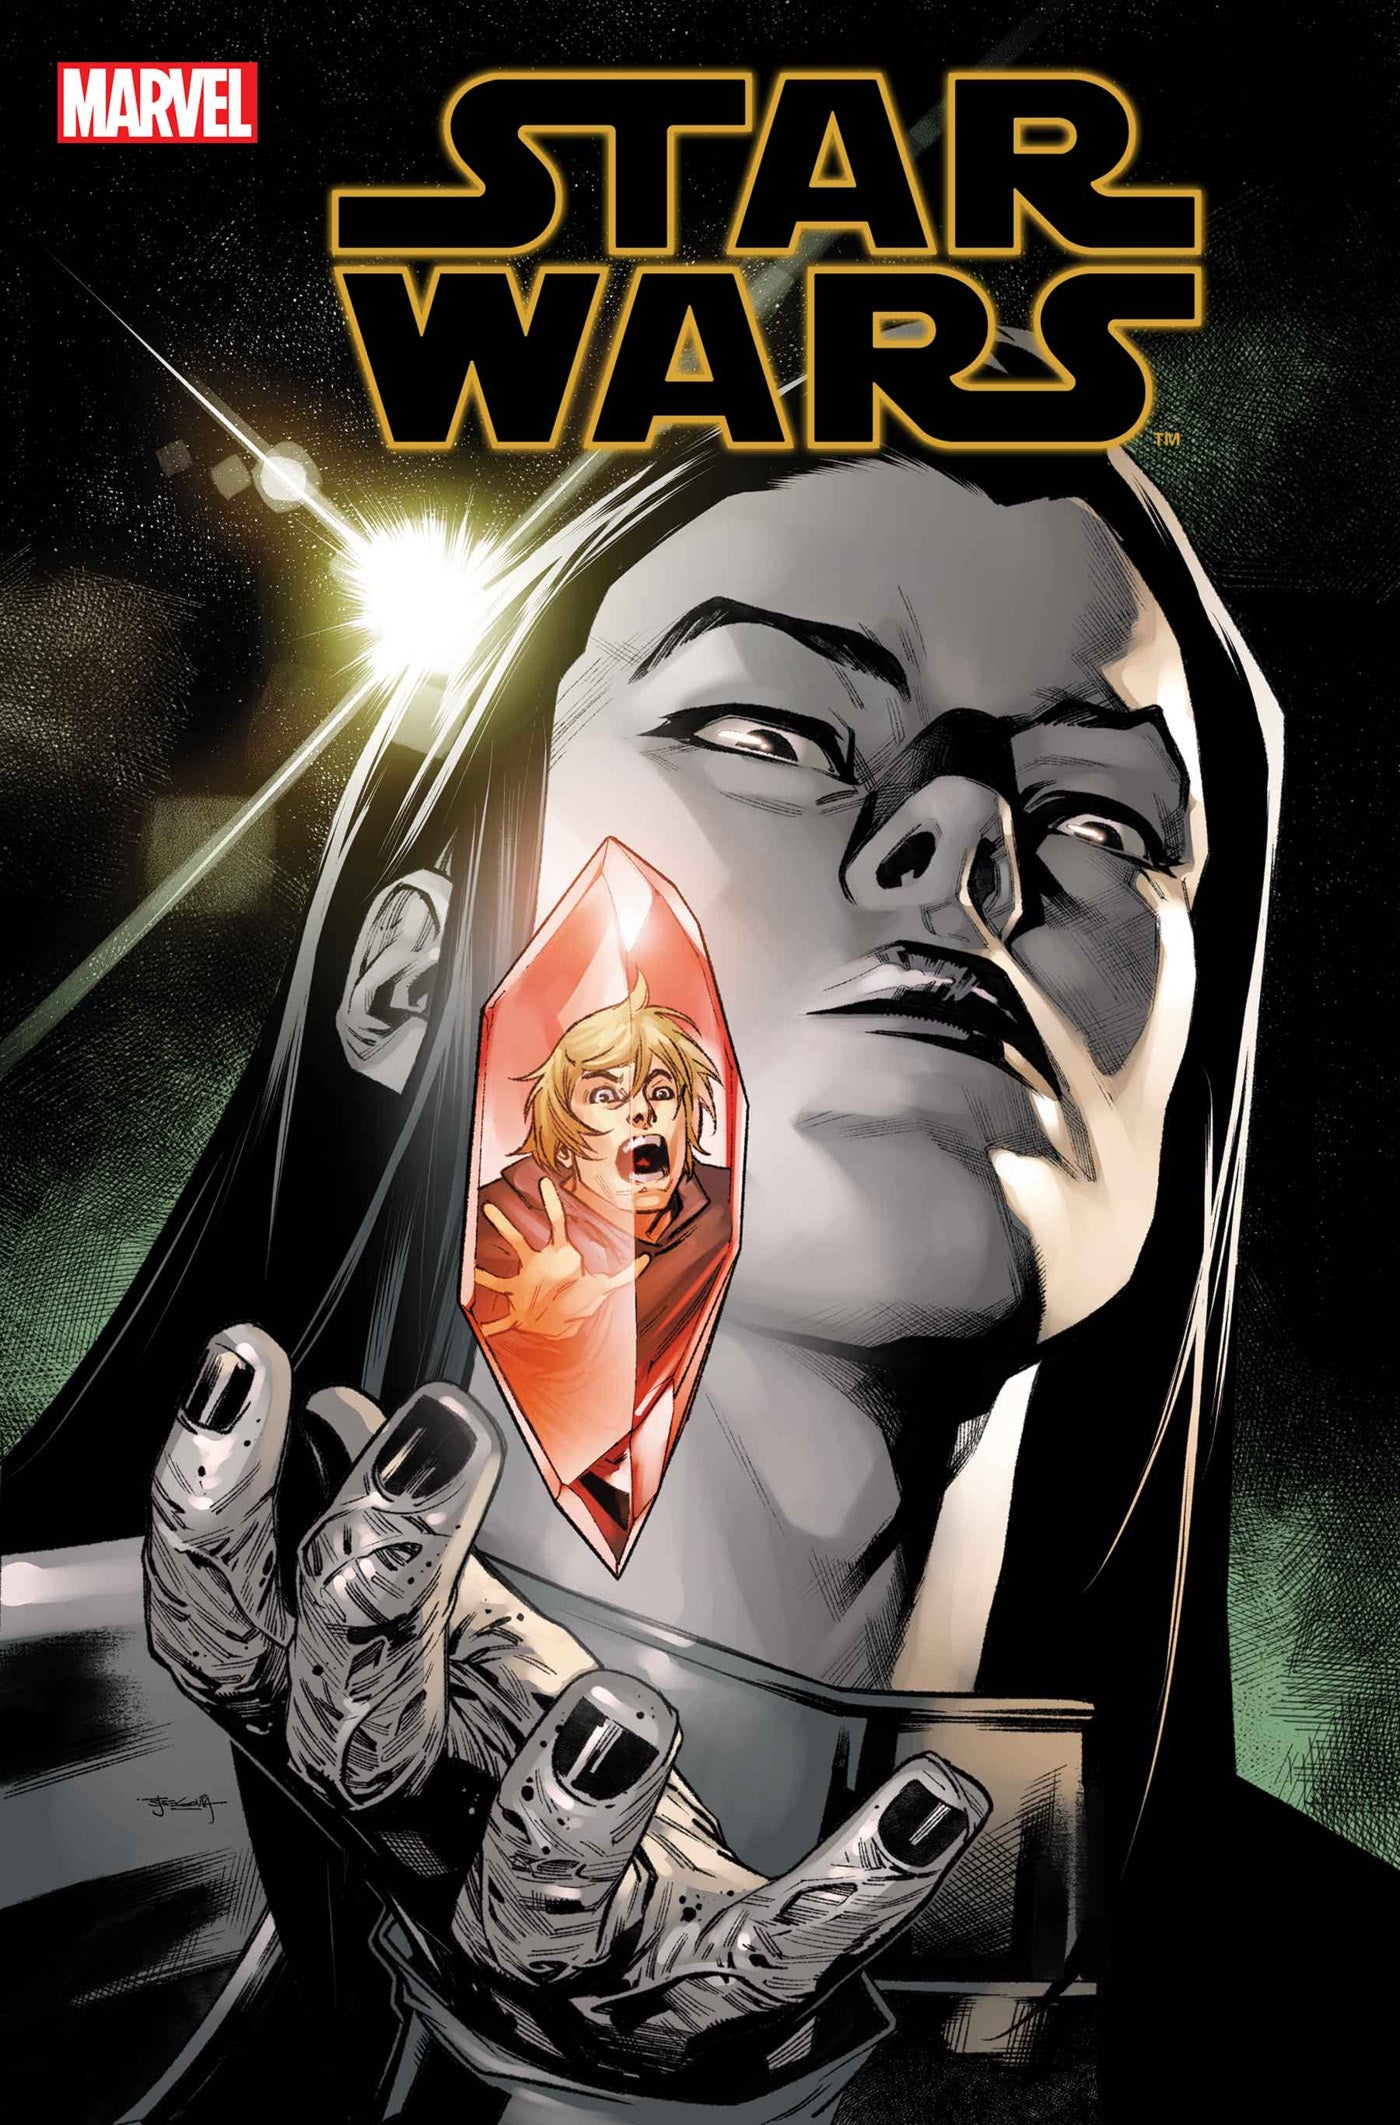 Star Wars #42 cover